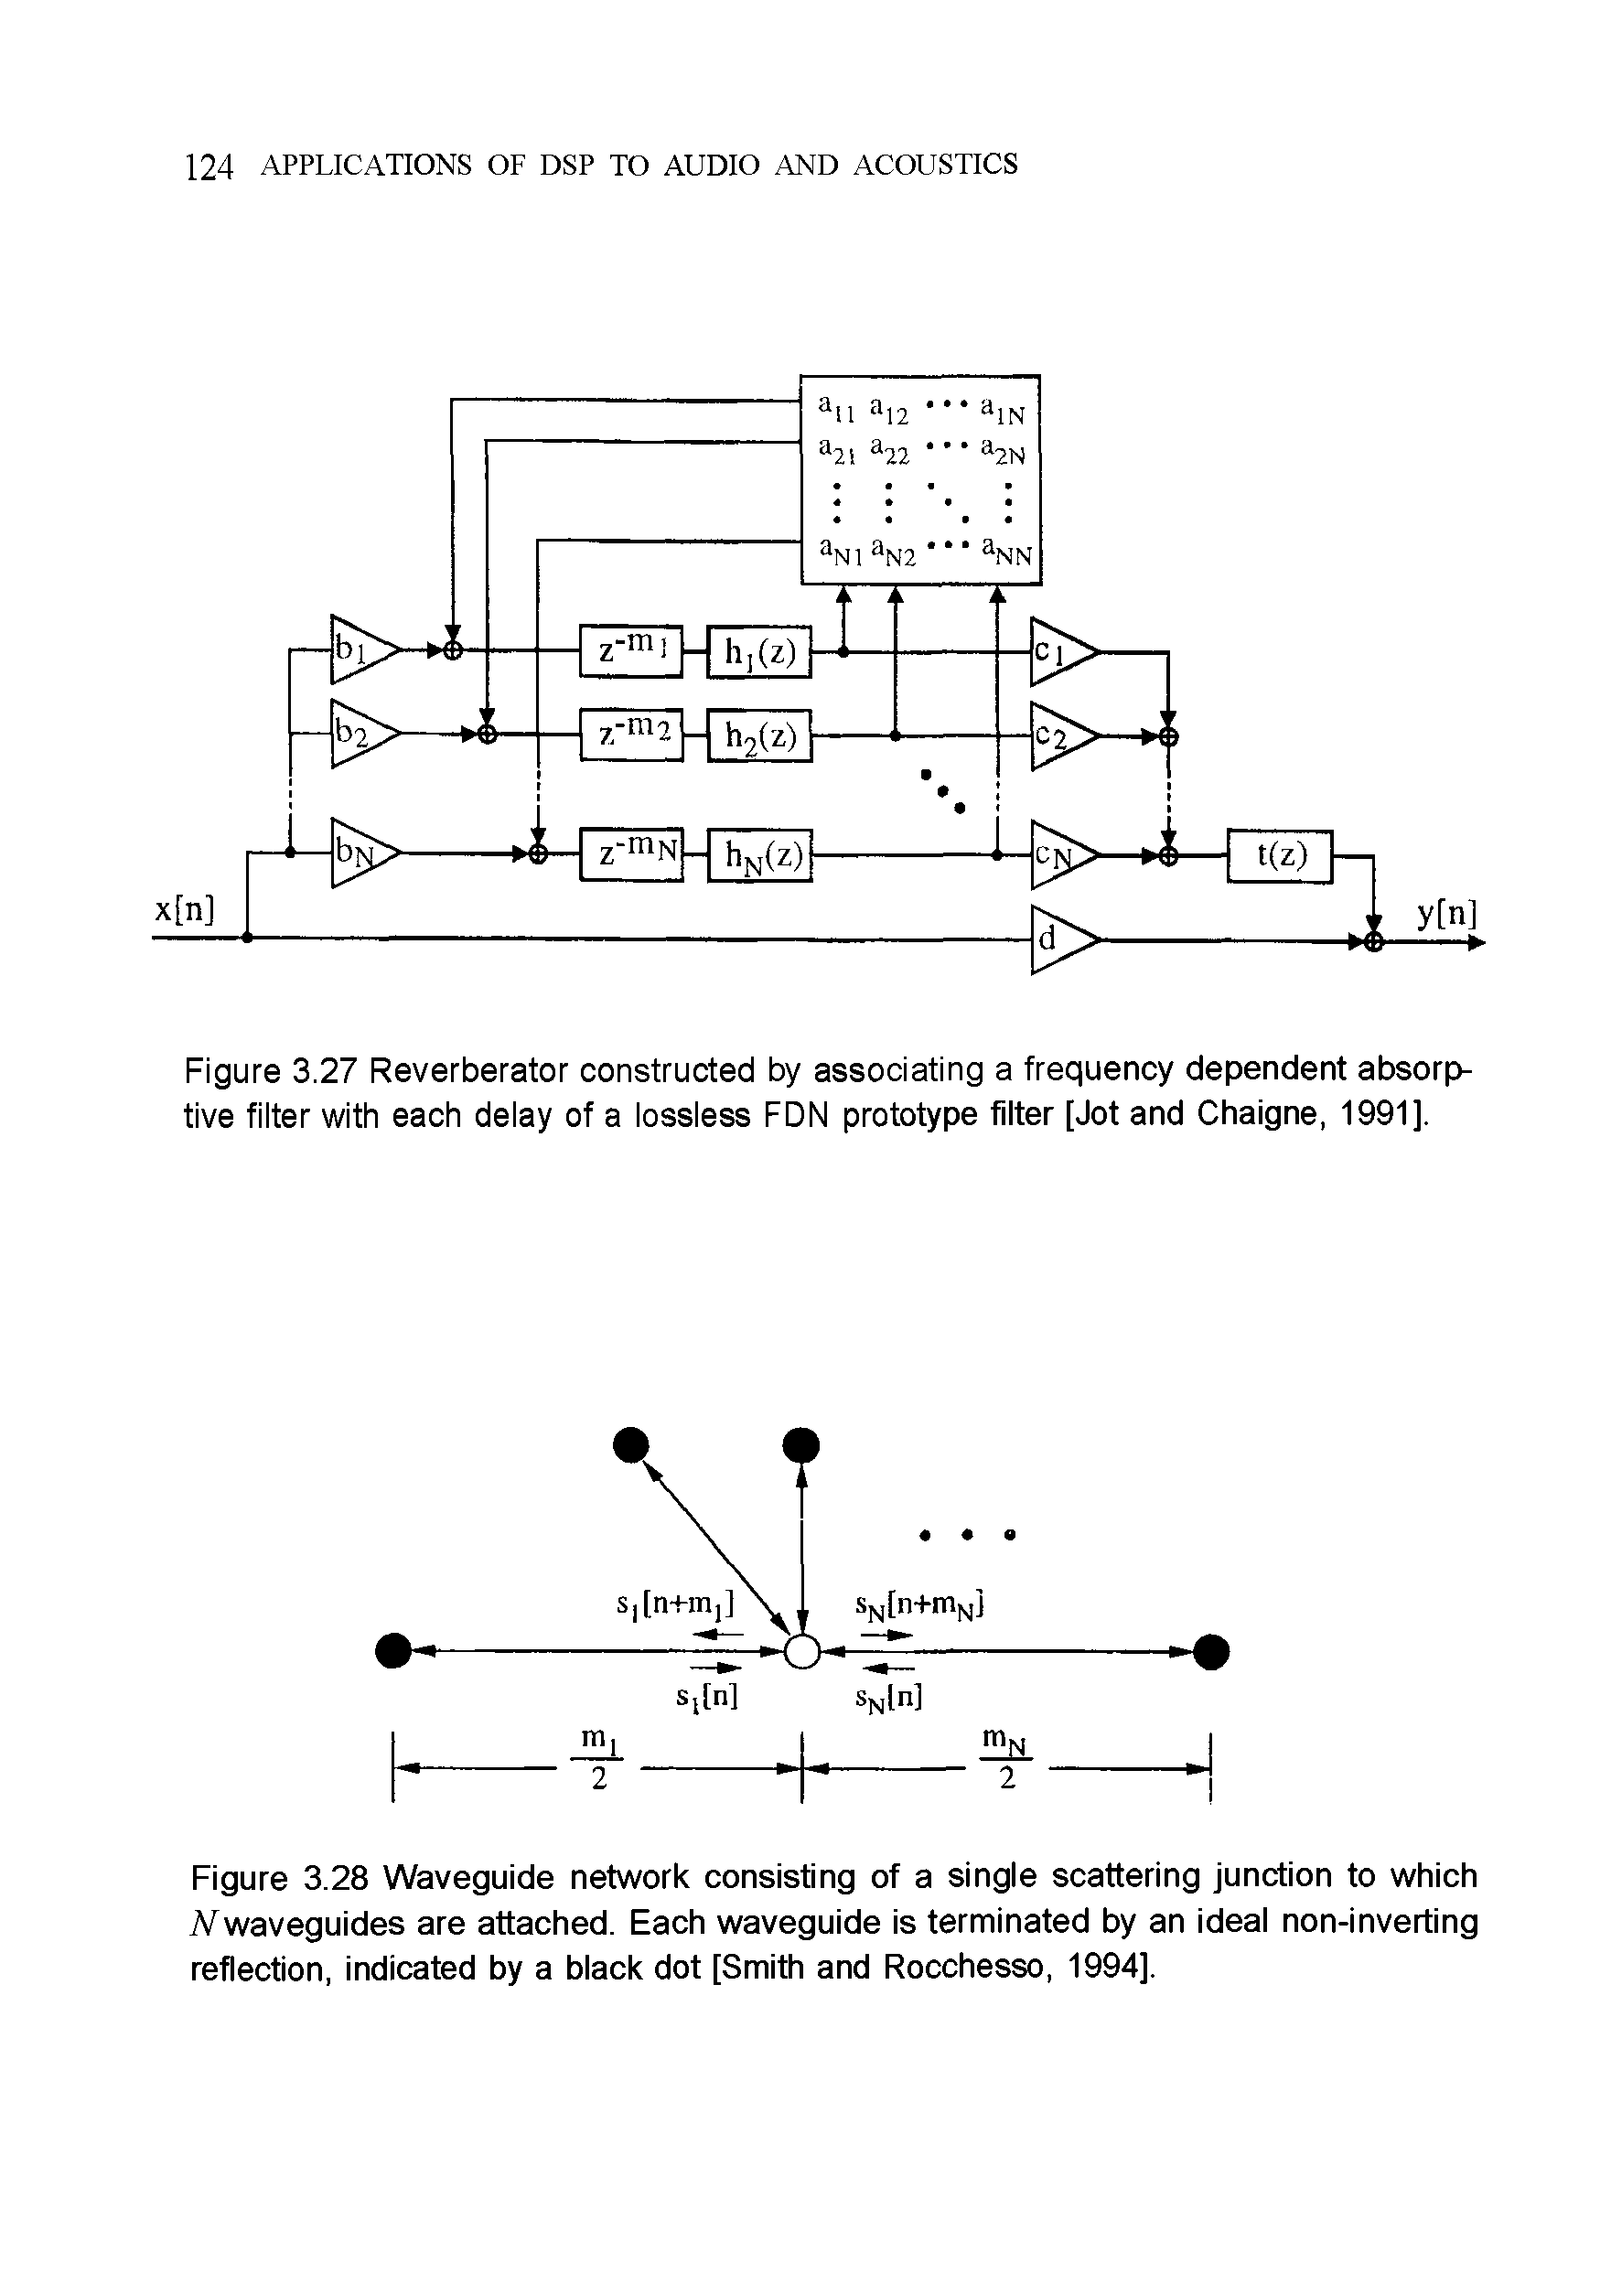 Figure 3.27 Reverberator constructed by associating a frequency dependent absorptive filter with each delay of a lossless FDN prototype filter [Jot and Chaigne, 1991].